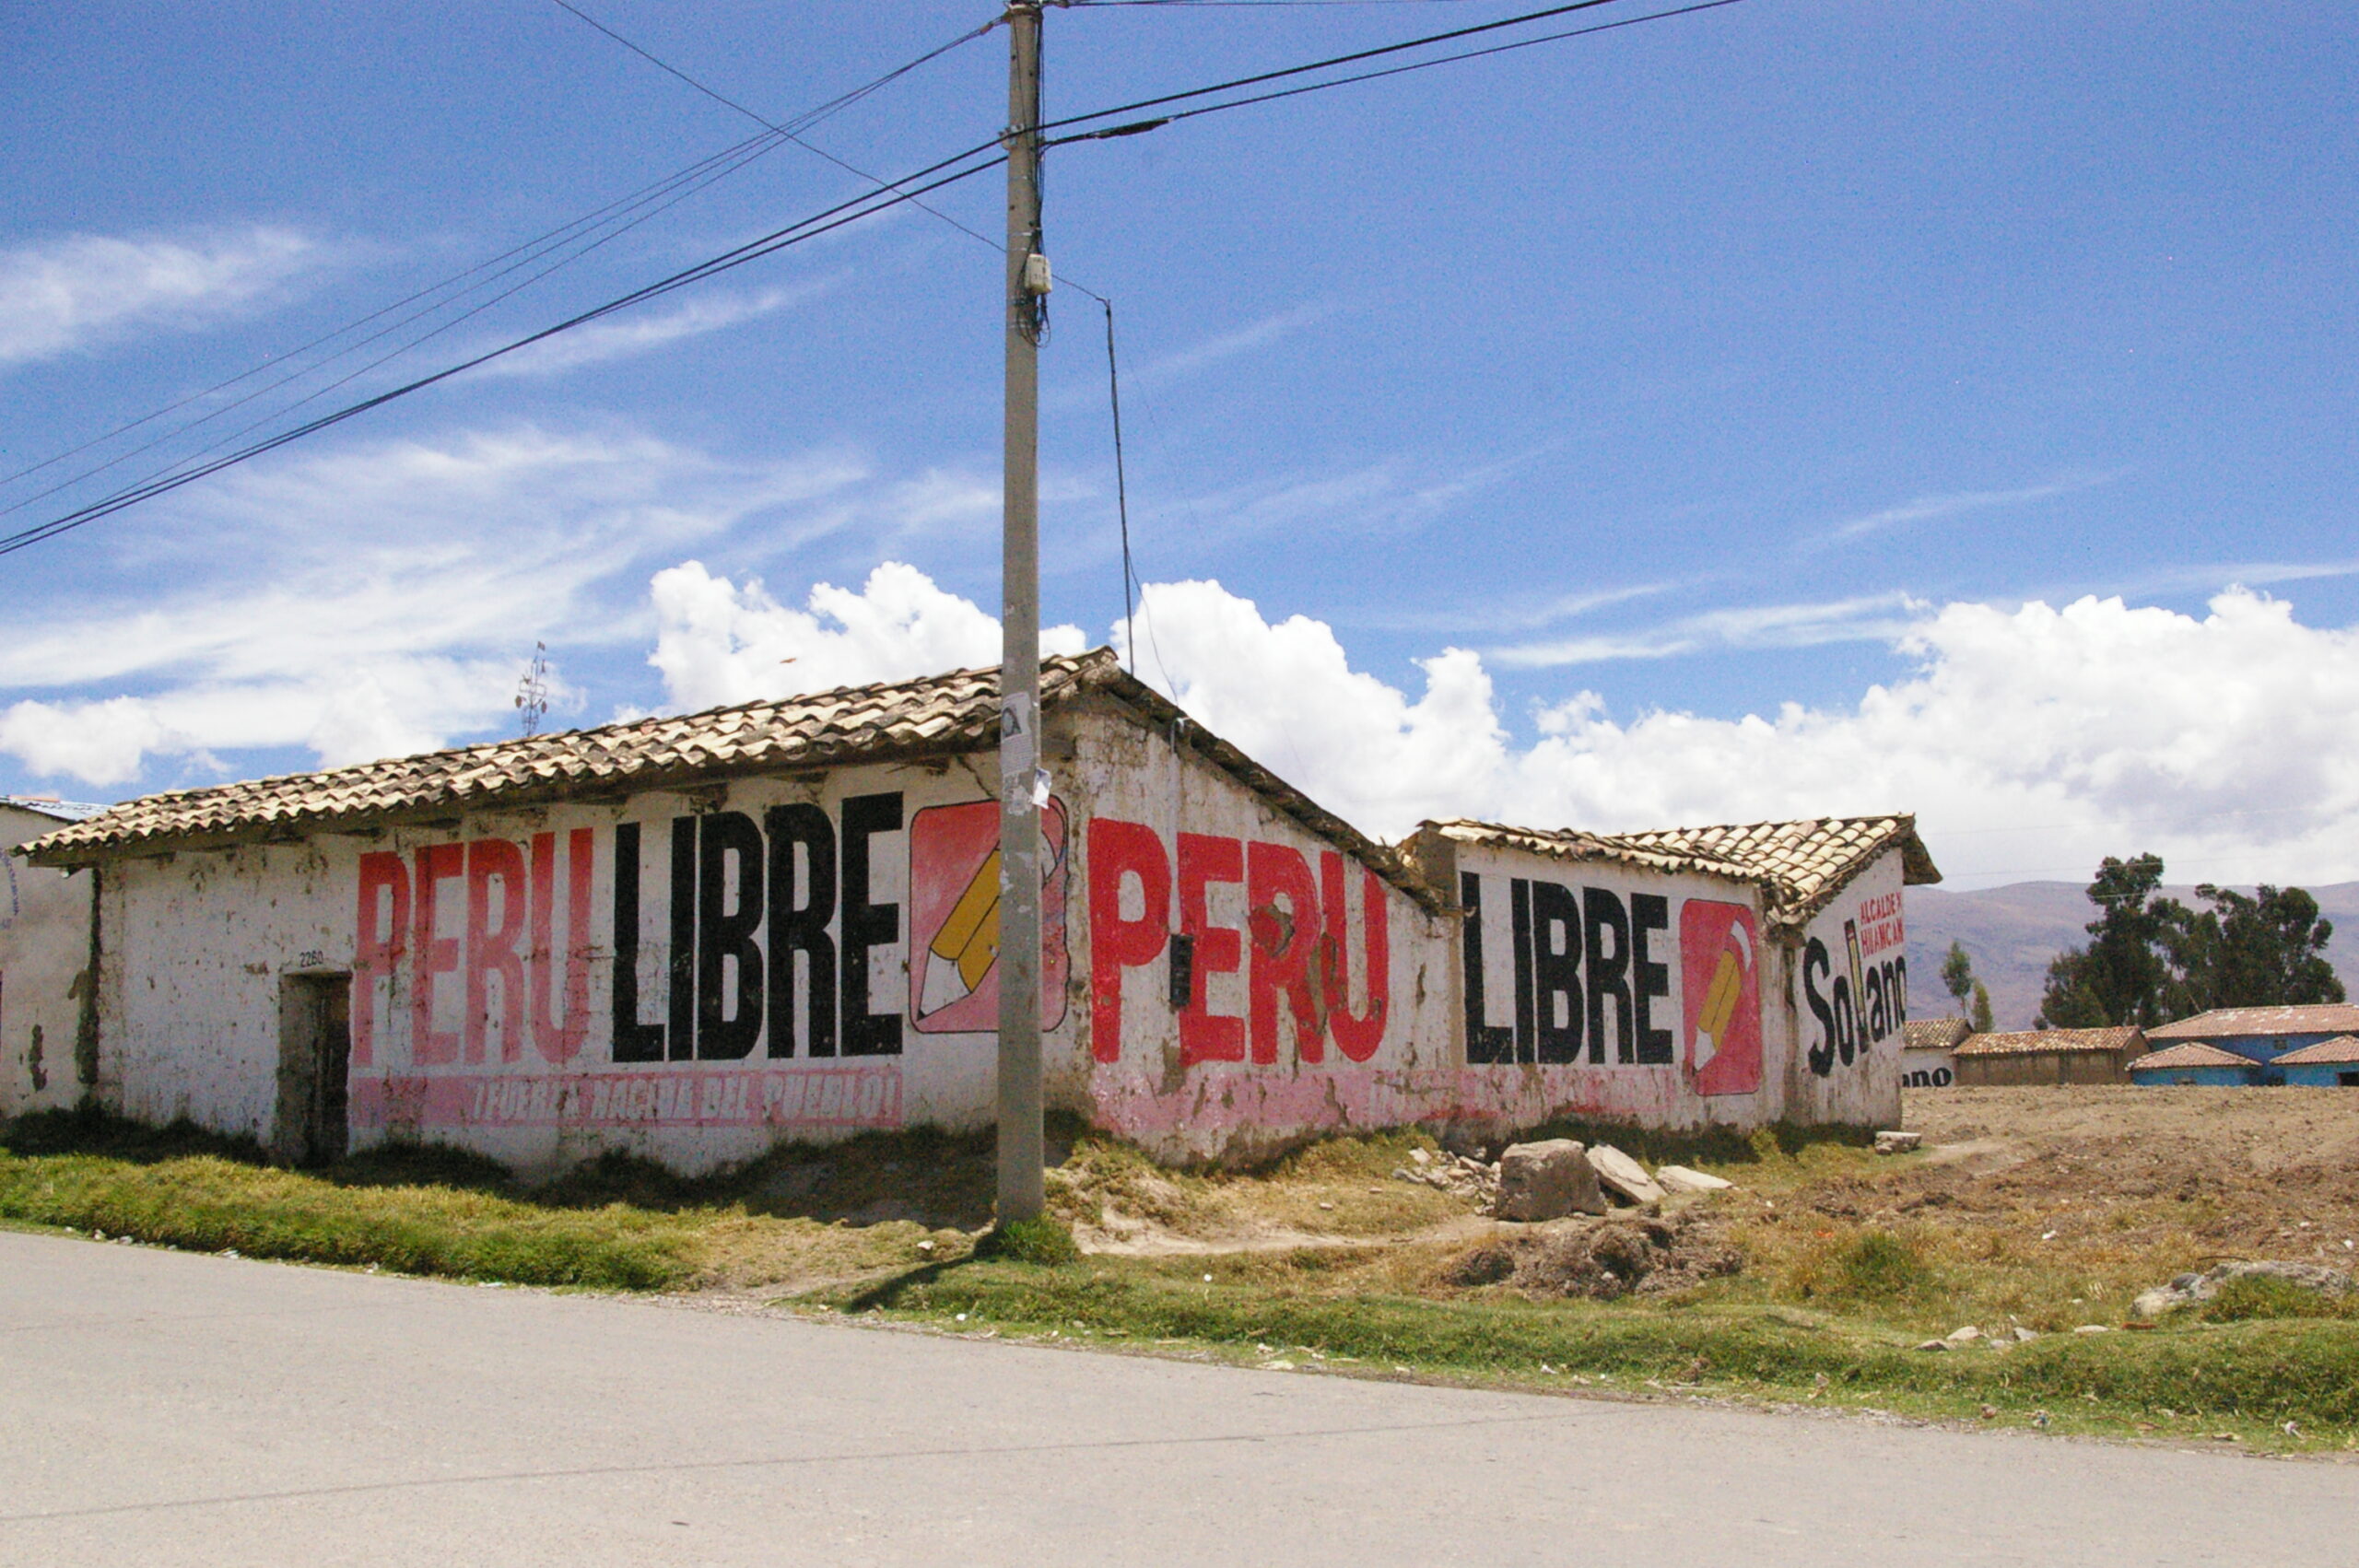 Blood of the People: Inside the Peruvian Uprising